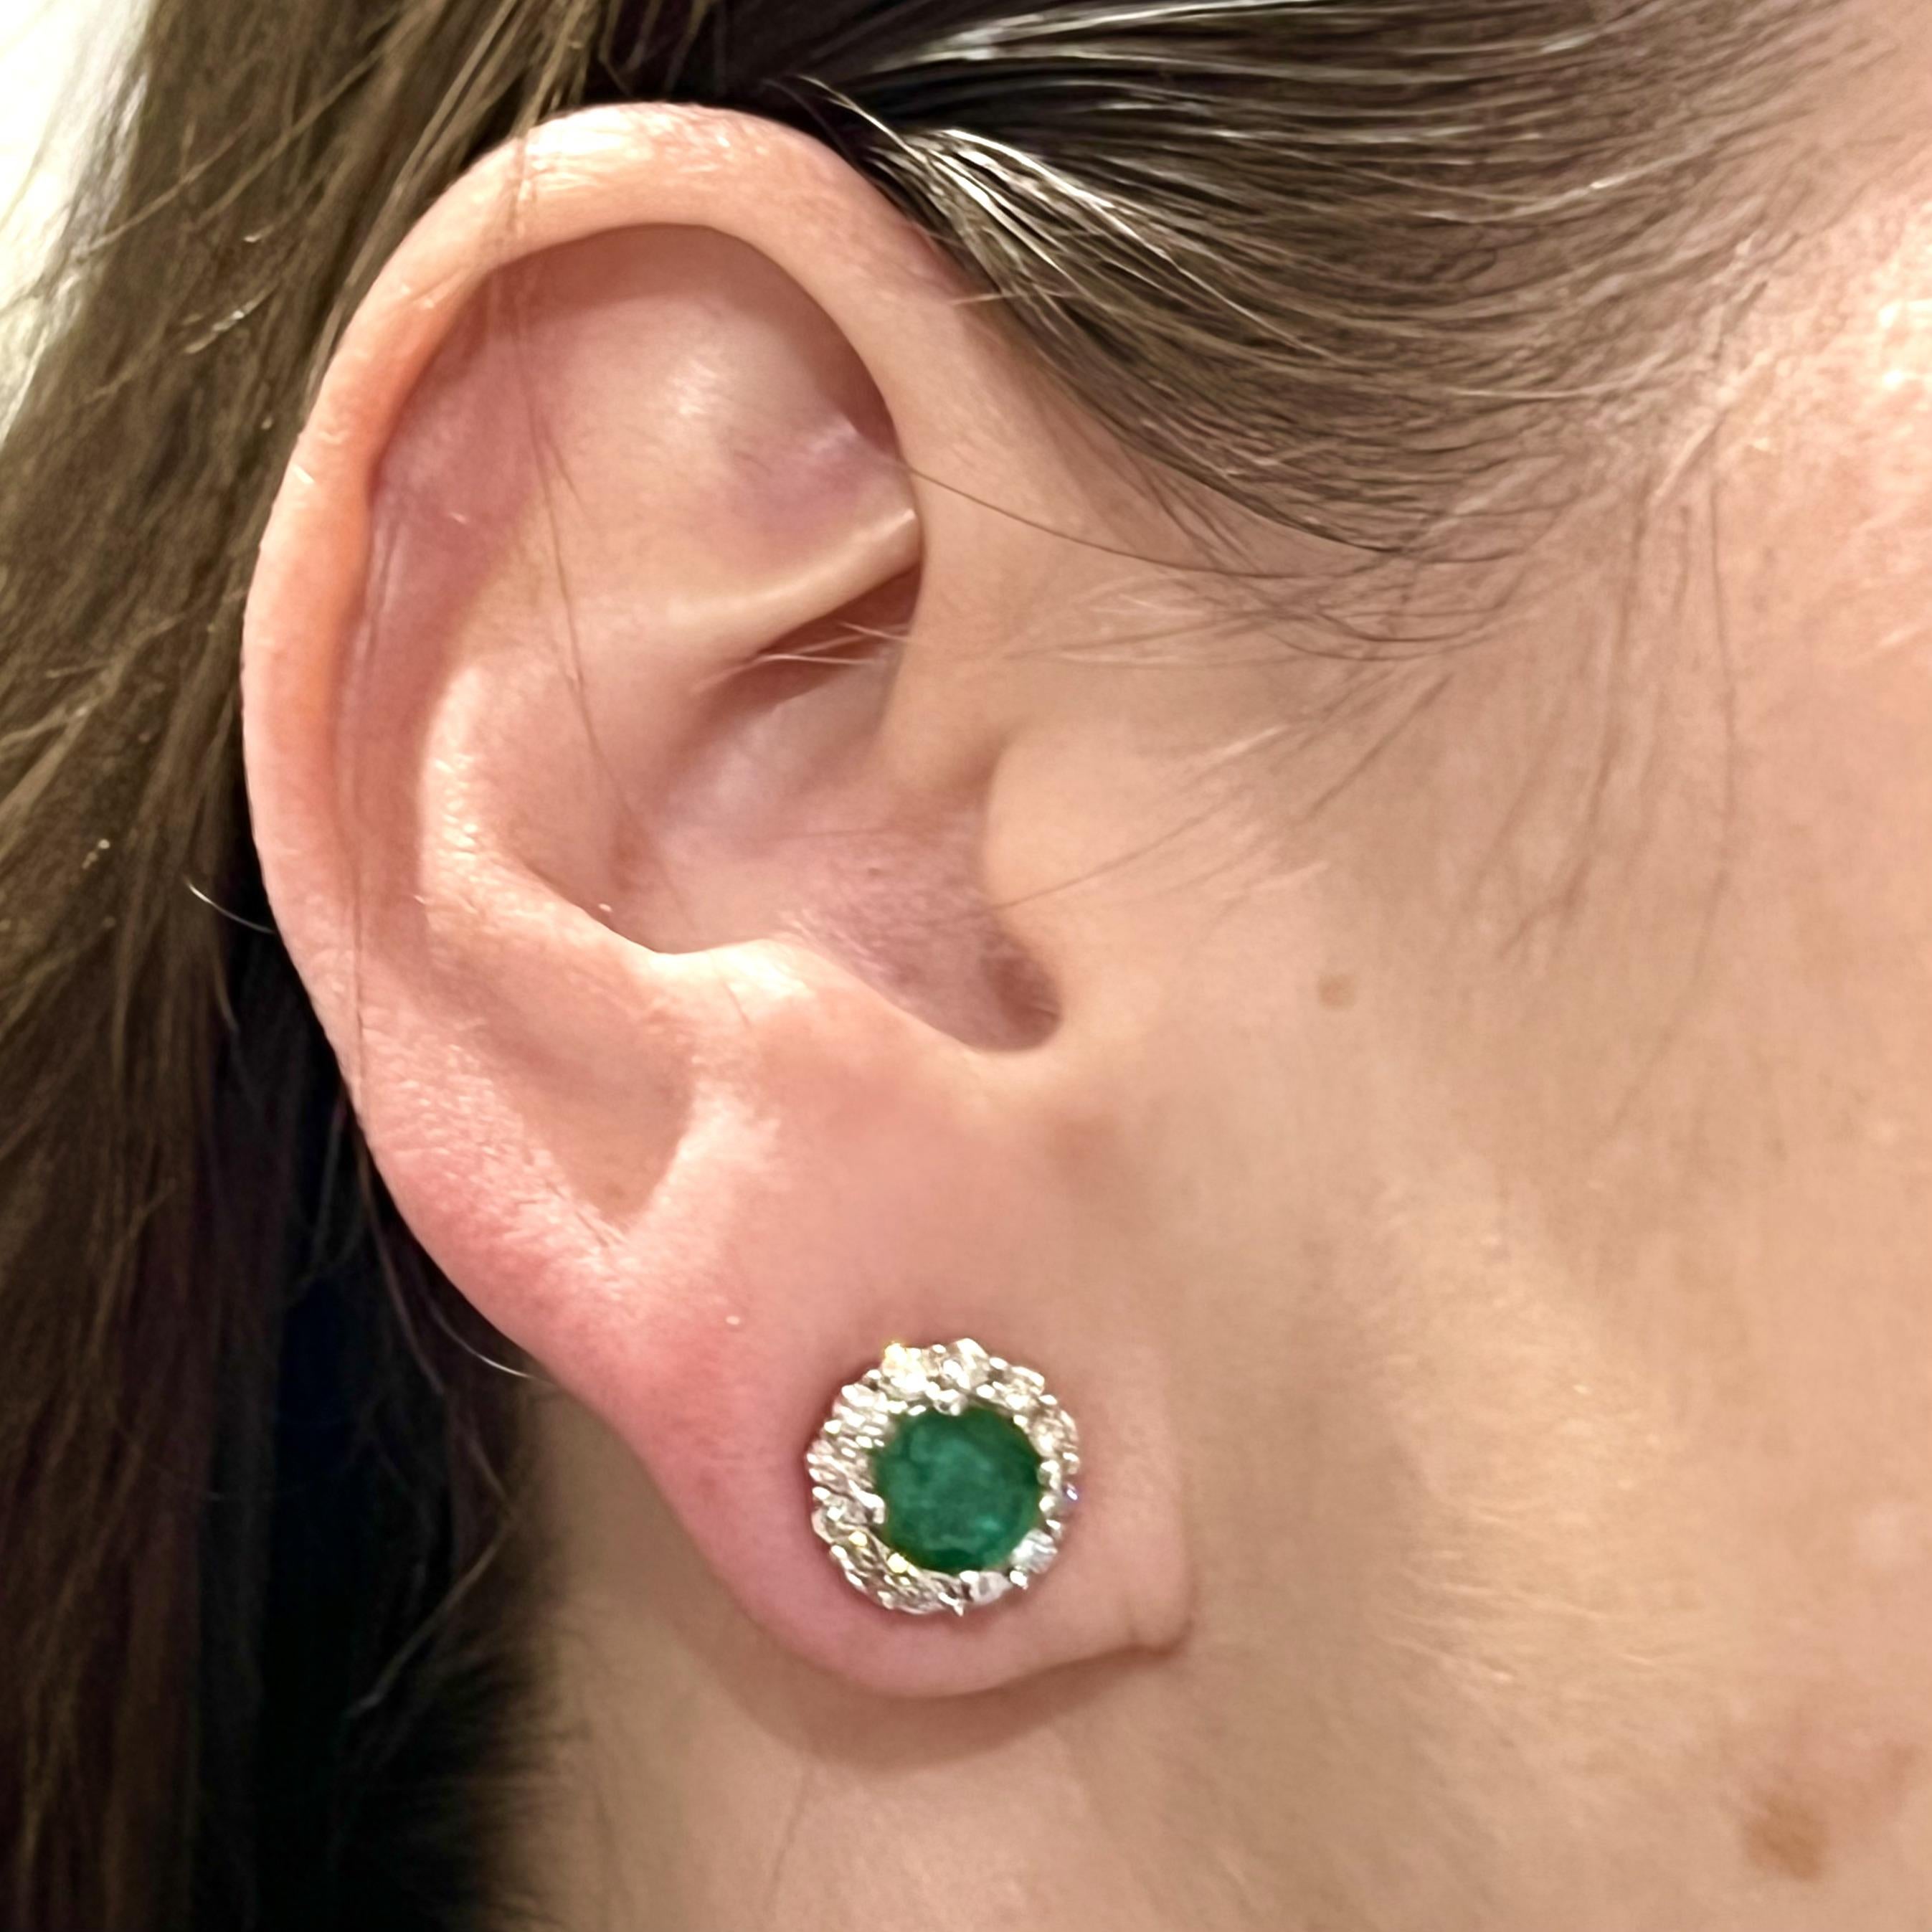 Natural Emerald Diamond Earrings 14k Gold 3.02 TCW Certified $5,490 211182

This is a Unique Custom Made Glamorous Piece of Jewelry!

Nothing says, 